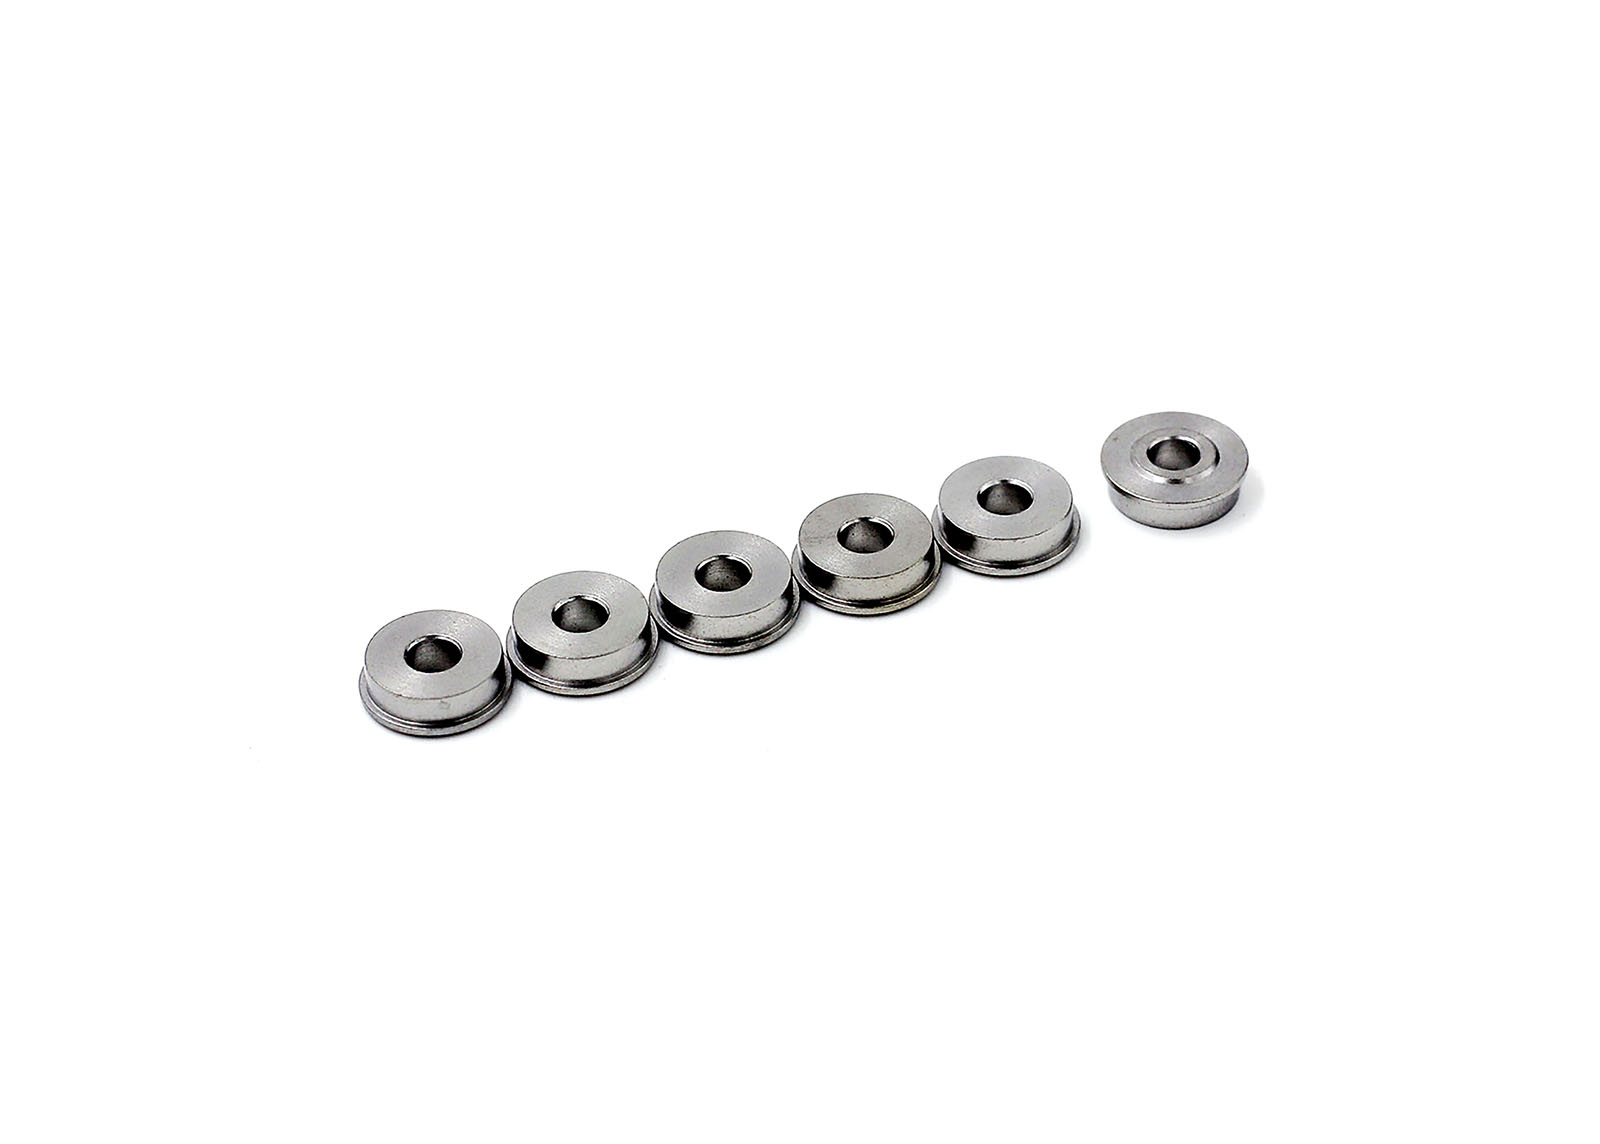 Tempered Stainless Bushings 8mm (6pcs) - Modify Airsoft parts